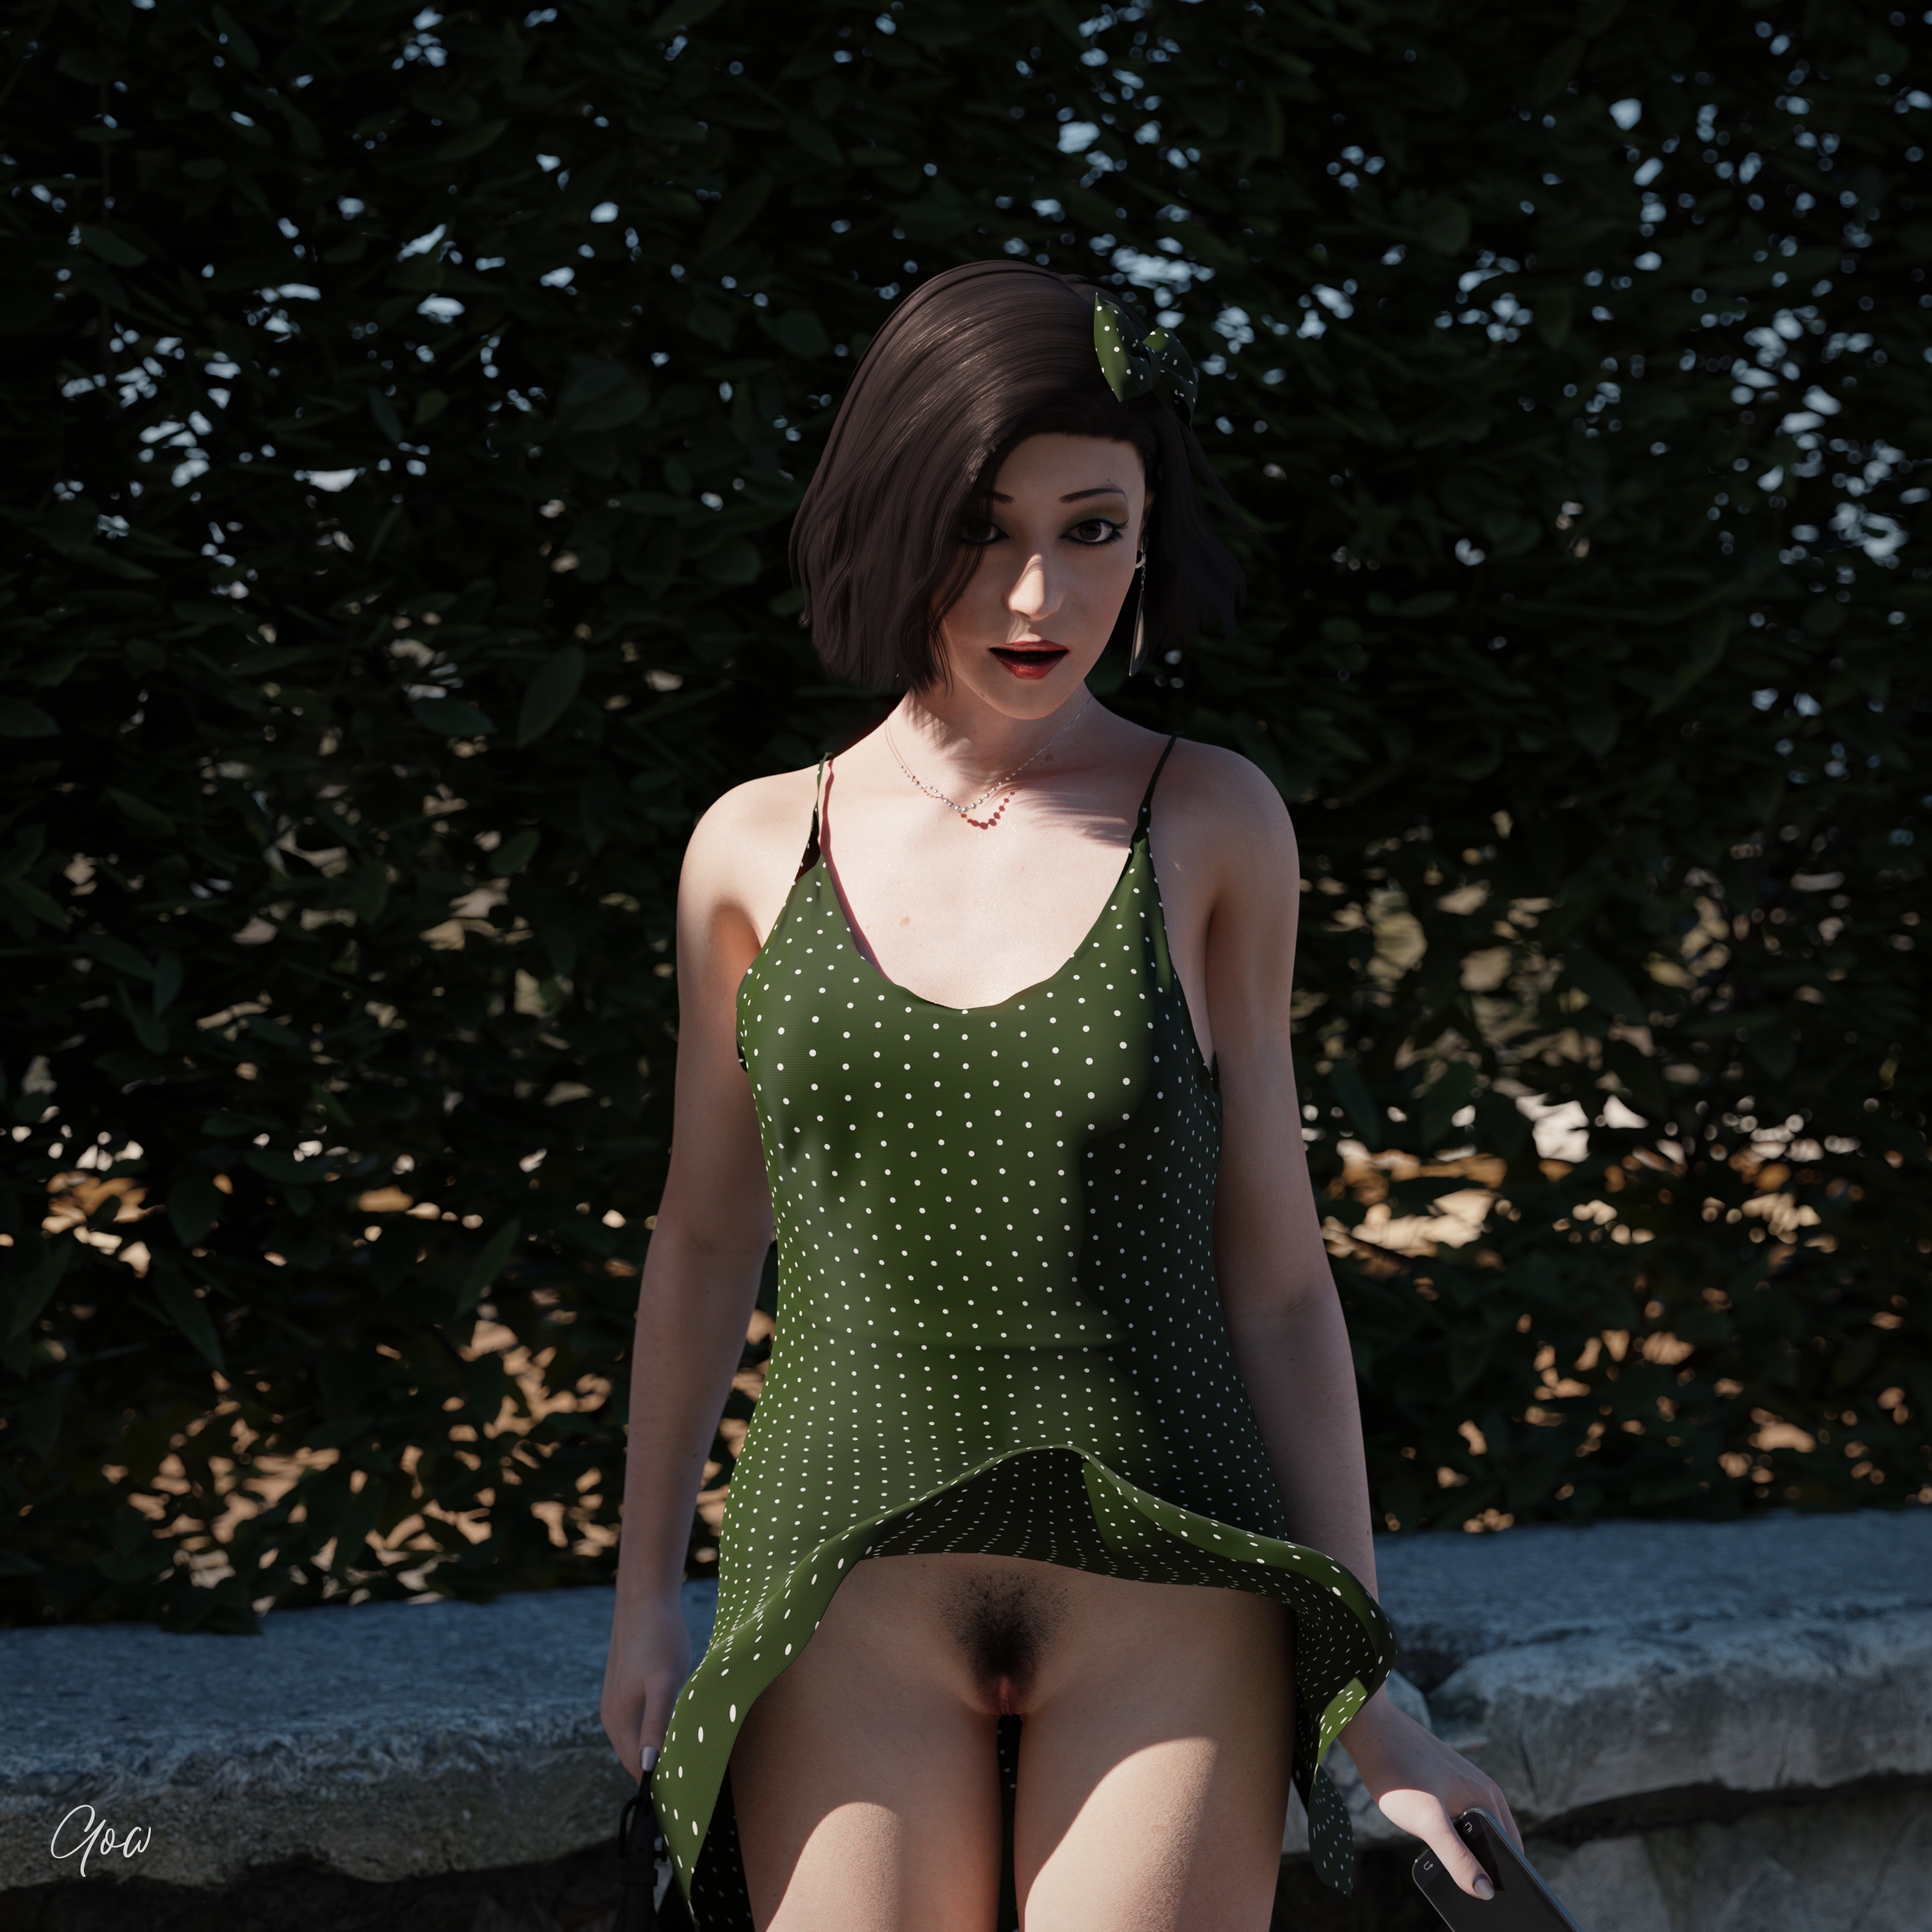 Dotted green and the wind - PT1 White Outdoor Lady Secretary Photoshoot Clothed Skirt Upskirt Pussy Wet Pussy Legs Sexy Sexyhot Photorealistic No Panties High Heels Hairy Pussy Party Dress Milf Natural Boobs Natural Tits